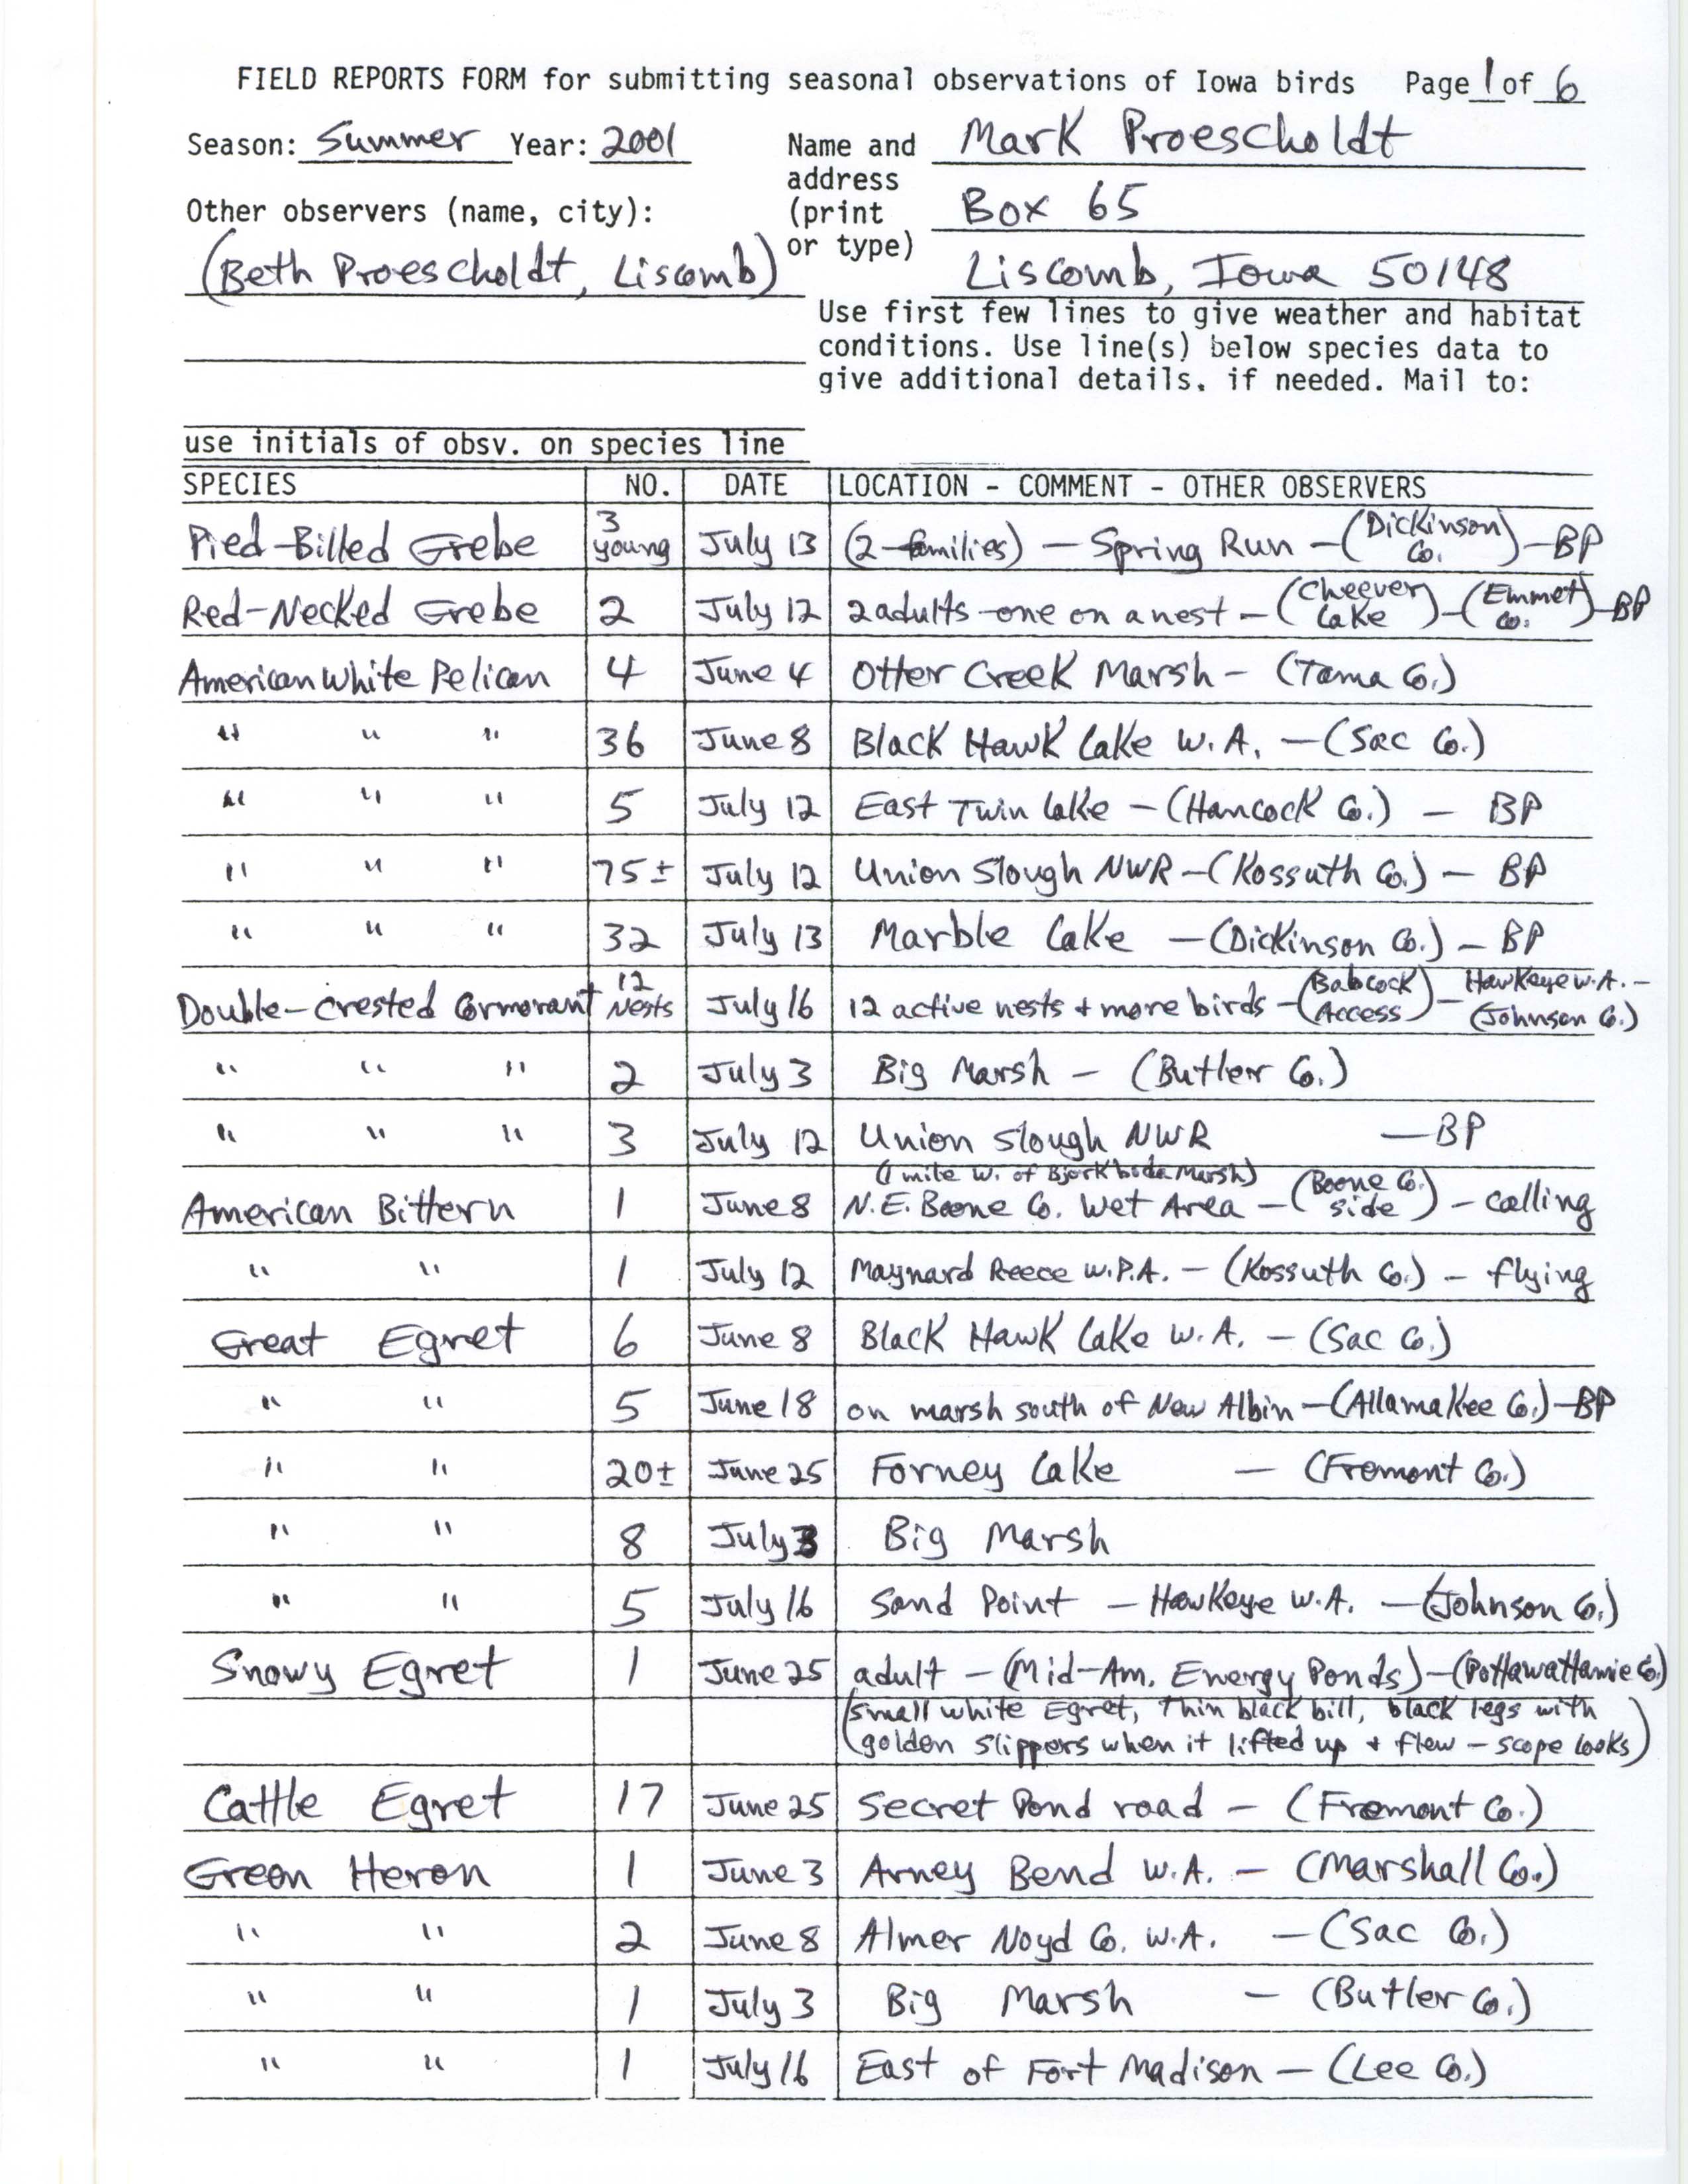 Field reports form for submitting seasonal observations of Iowa birds, Mark Proescholdt, summer 2001